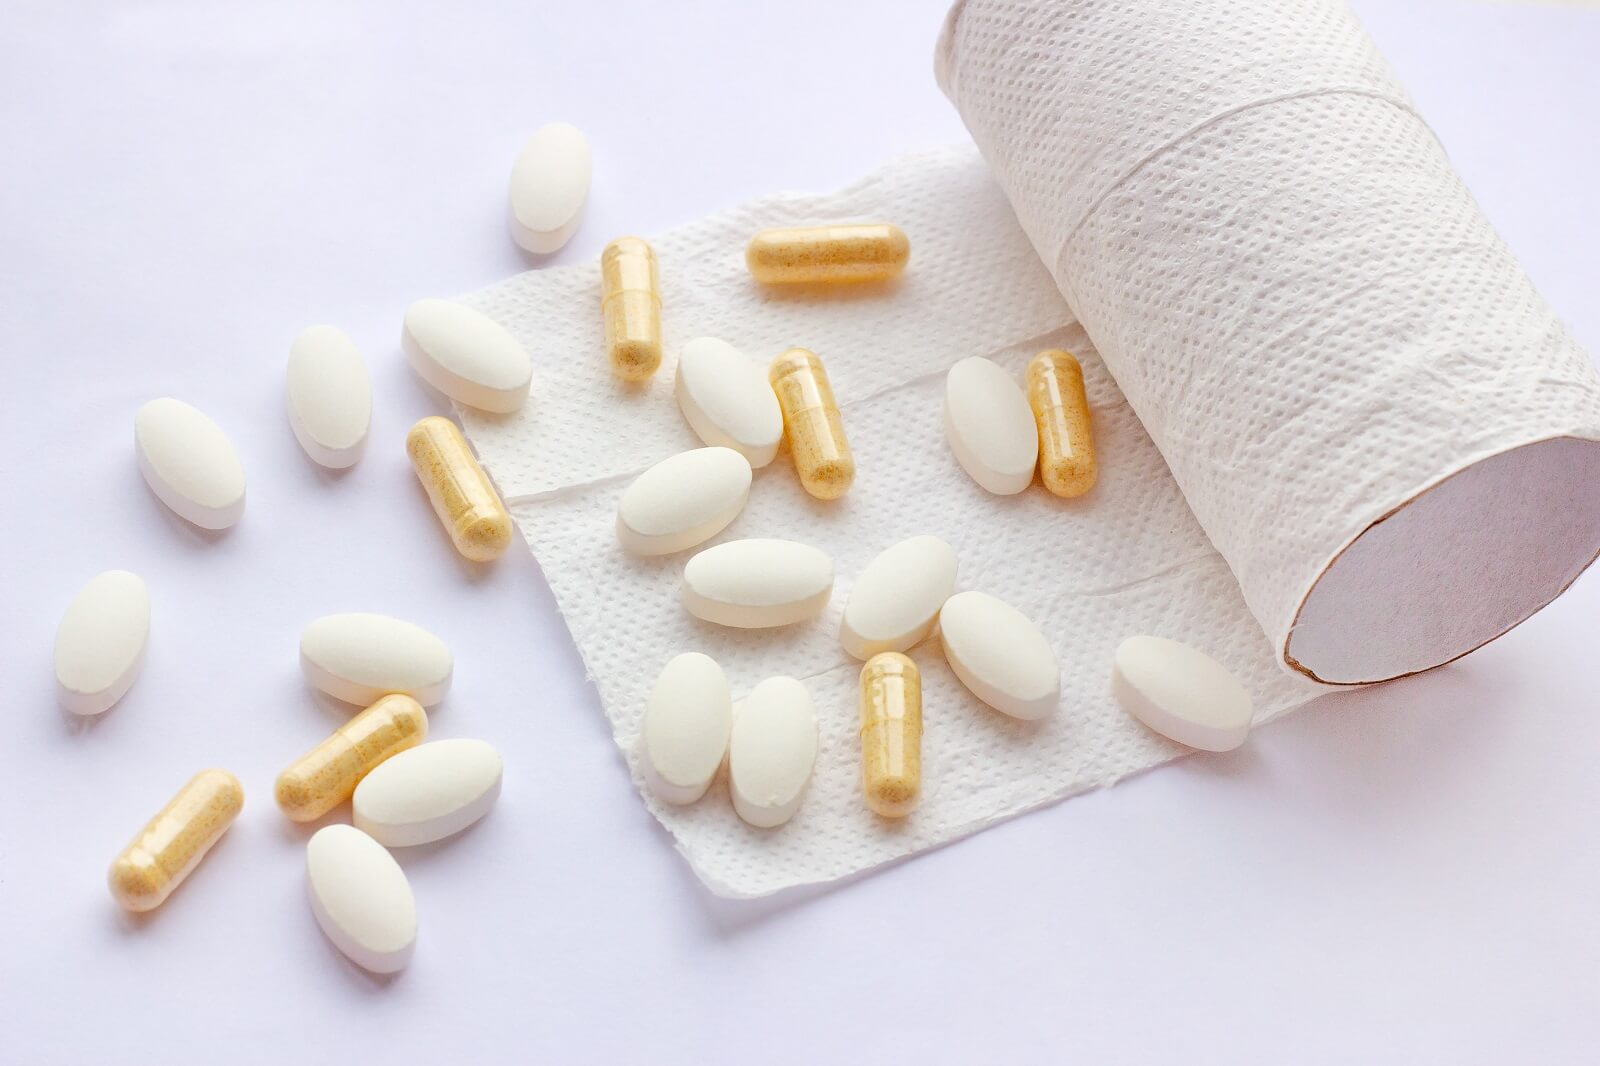 Pills, capsules and tablets with toilet paper on light background. Pharmacy and medicine concept.